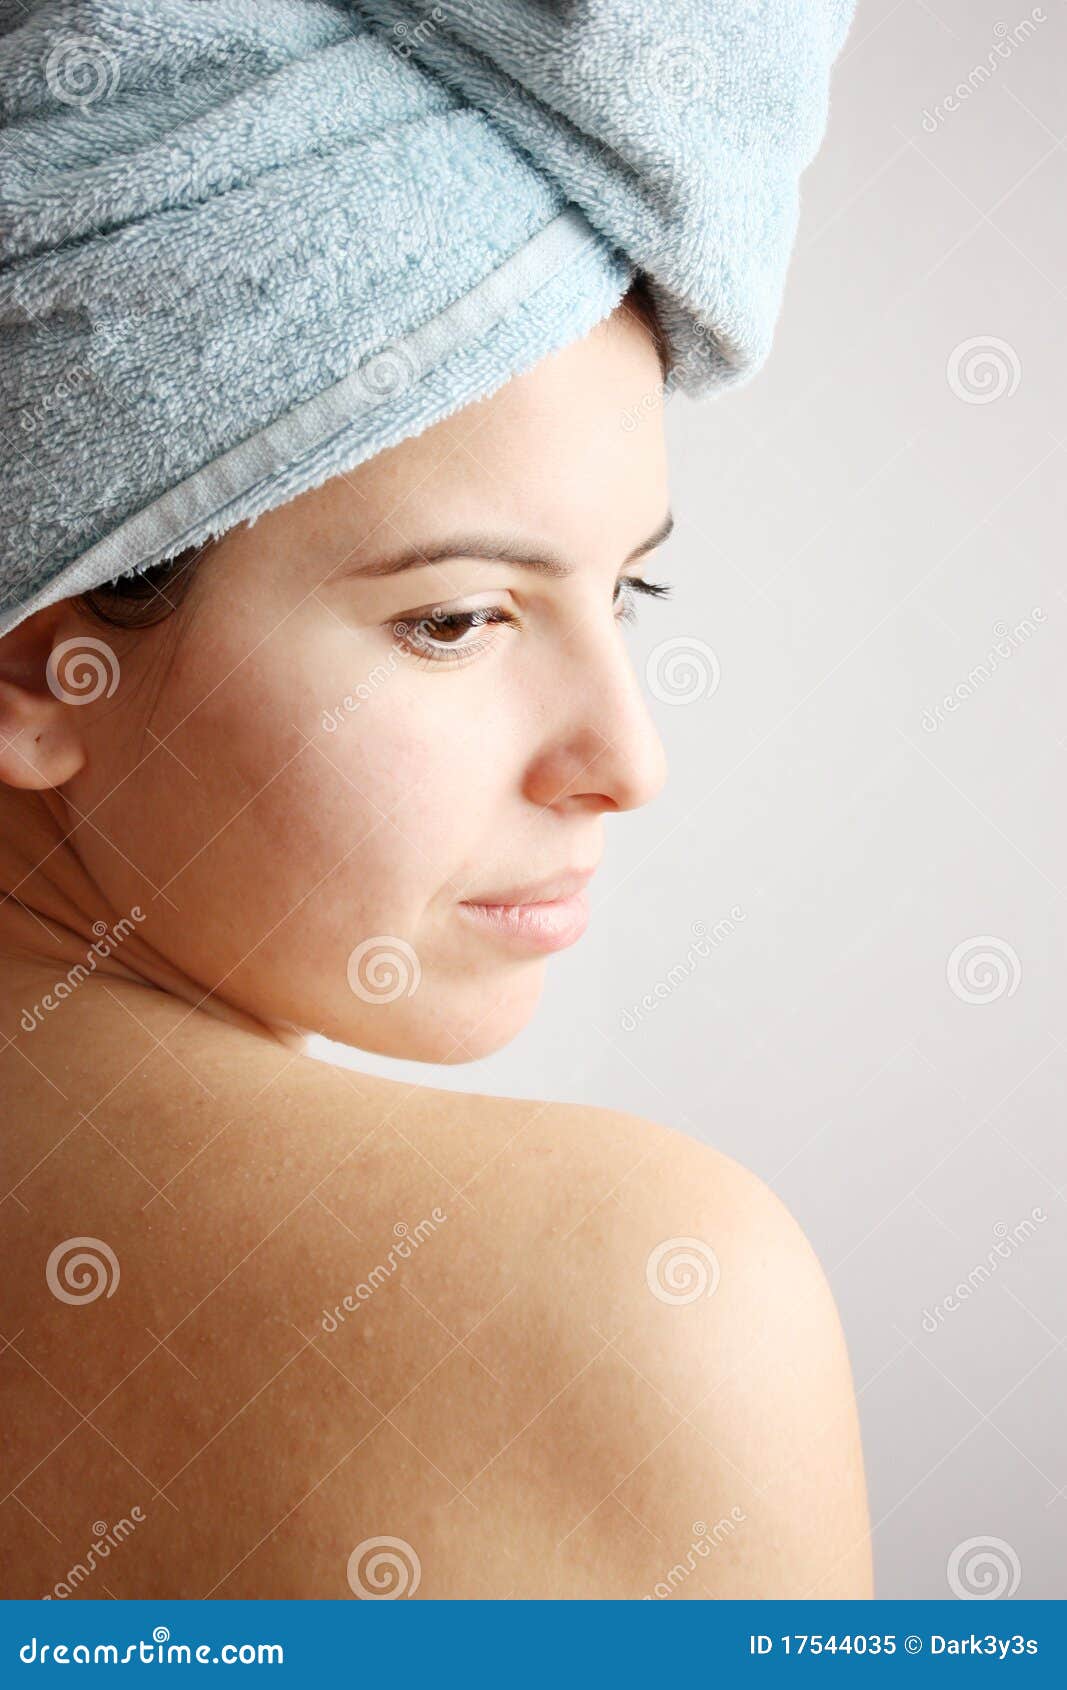 Spa. Wellness. Skin care stock image. Image of bliss - 17544035